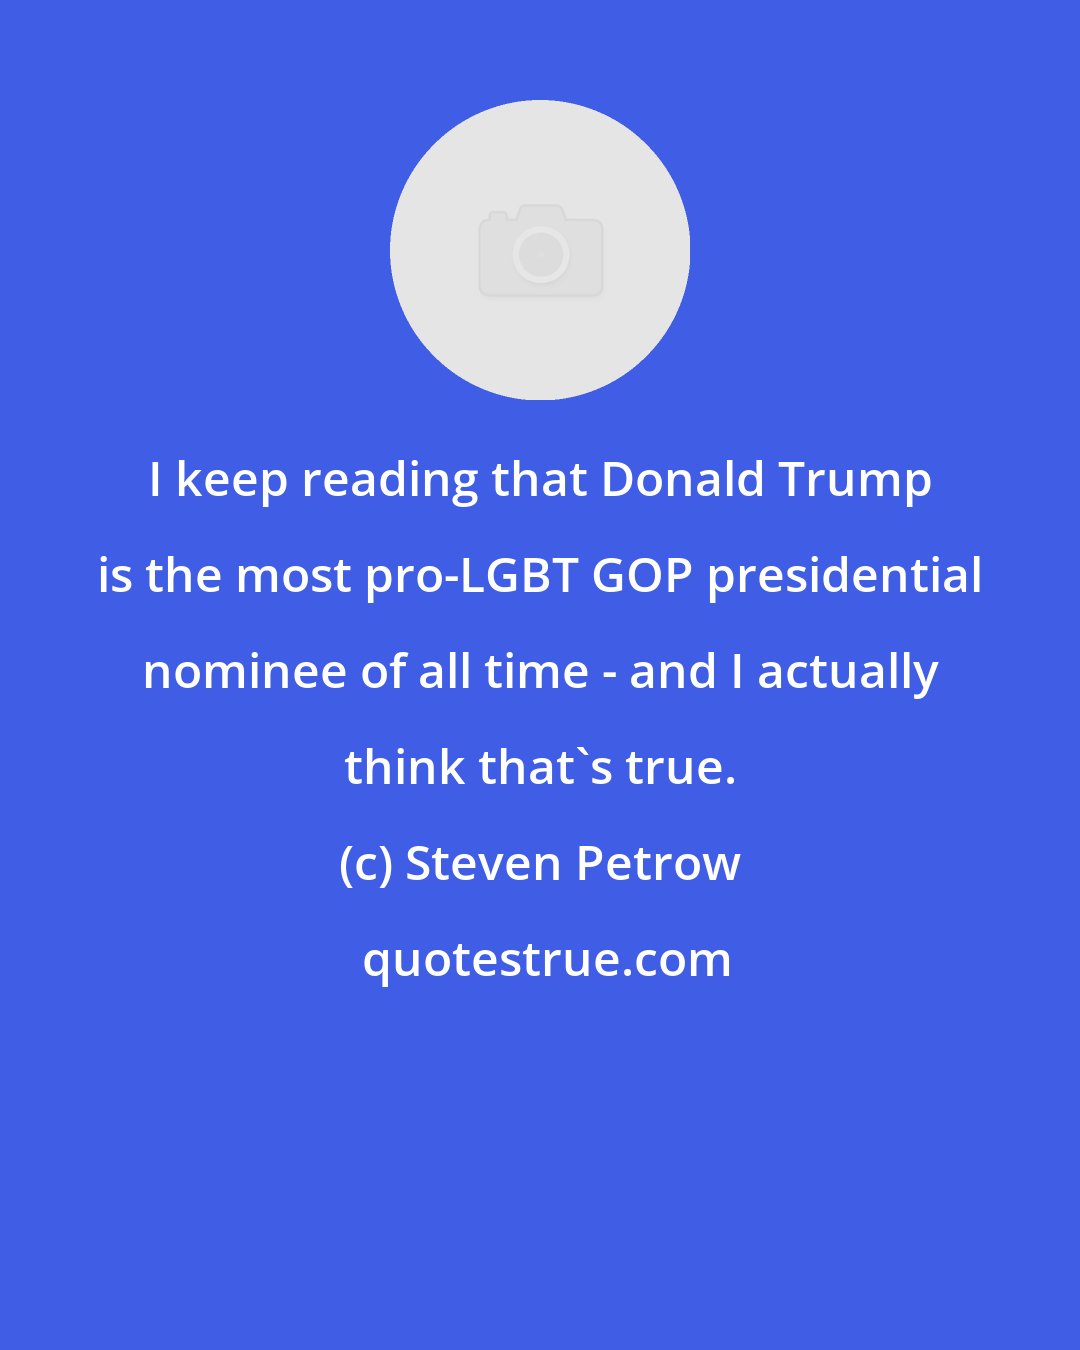 Steven Petrow: I keep reading that Donald Trump is the most pro-LGBT GOP presidential nominee of all time - and I actually think that's true.